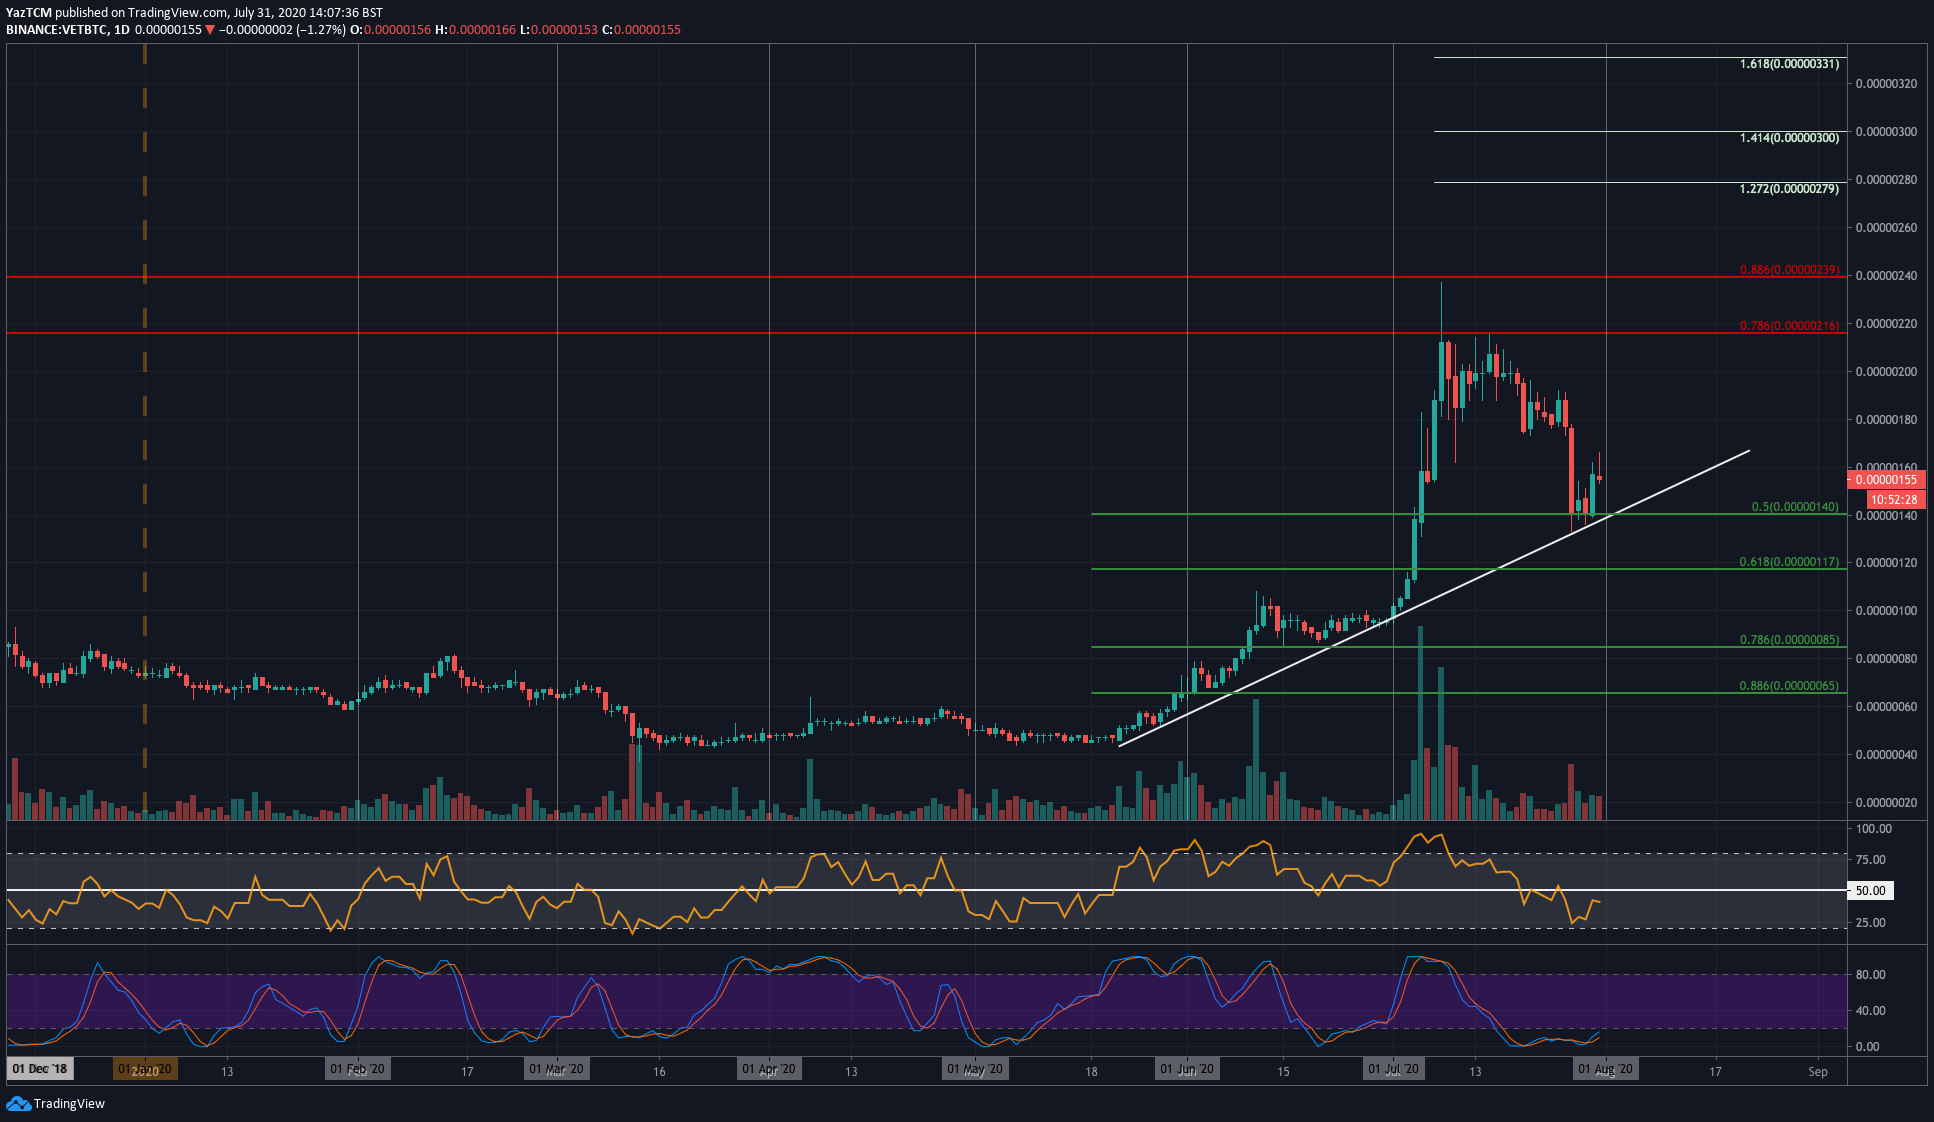 Crypto Price Analysis & Overview July 31st: Bitcoin, Ethereum, Ripple, Chainlink & VeChain